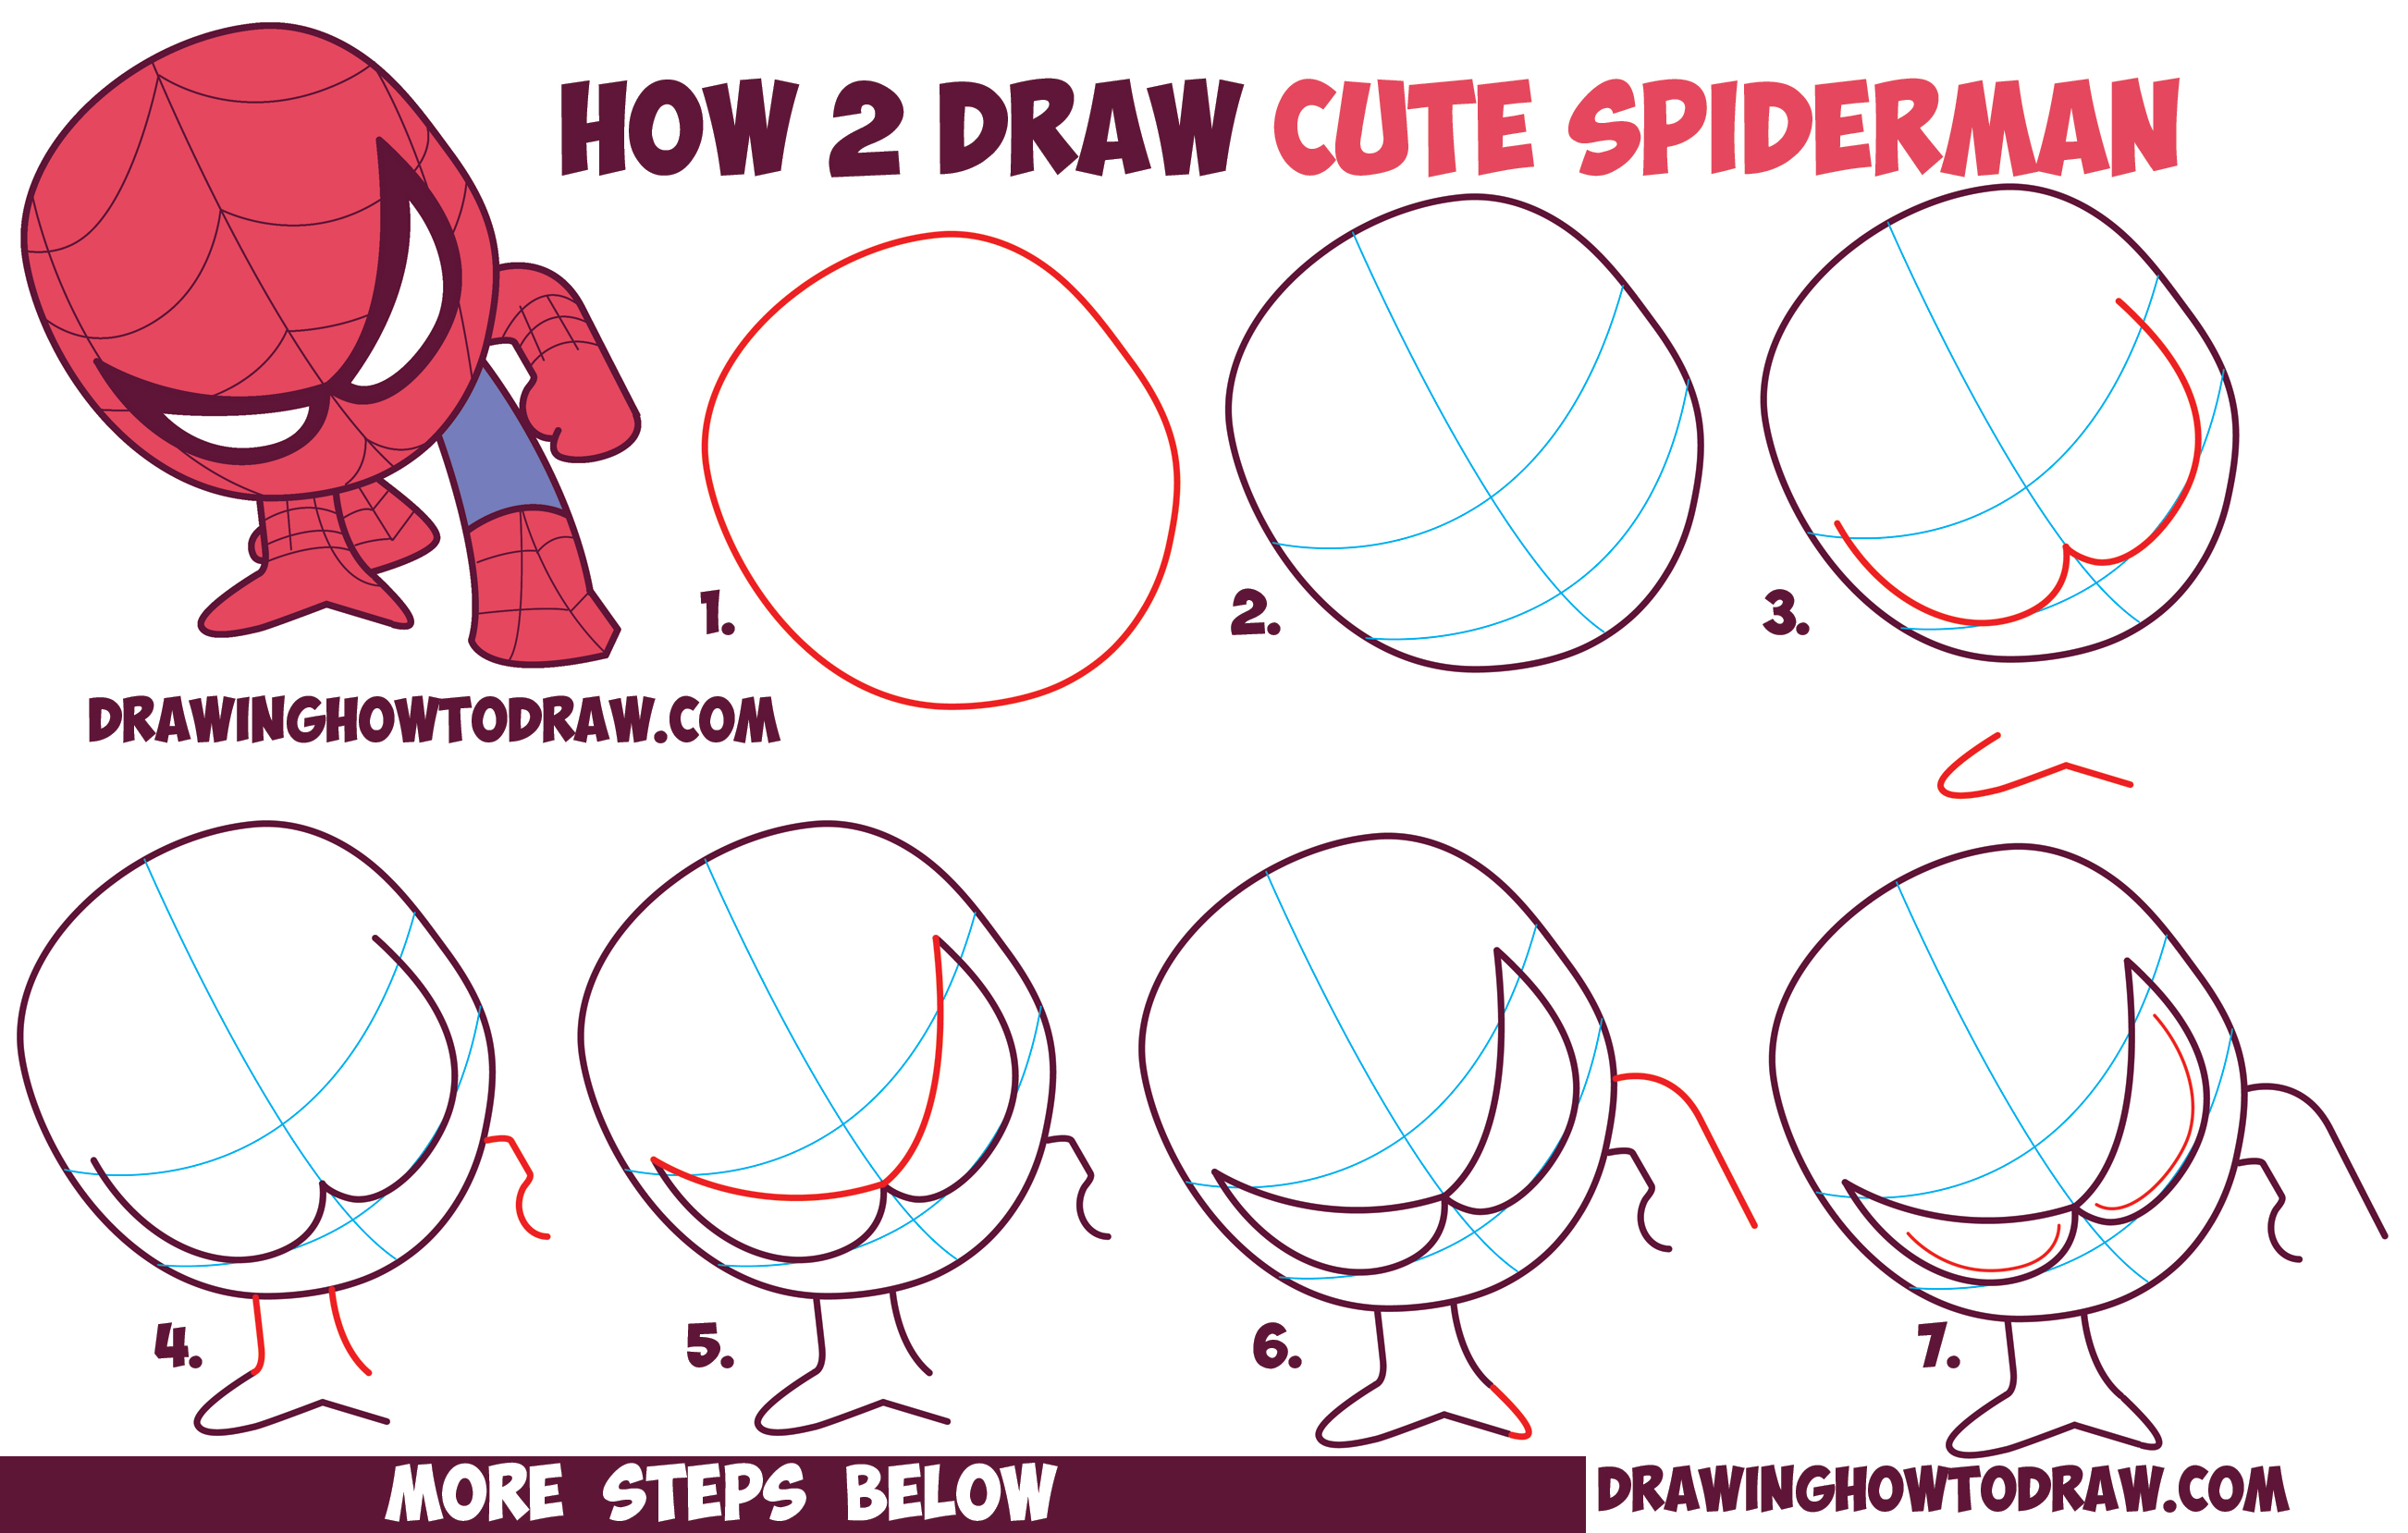 How to Draw Cute Spiderman (Chibi / Kawaii) Easy Step by Step Drawing